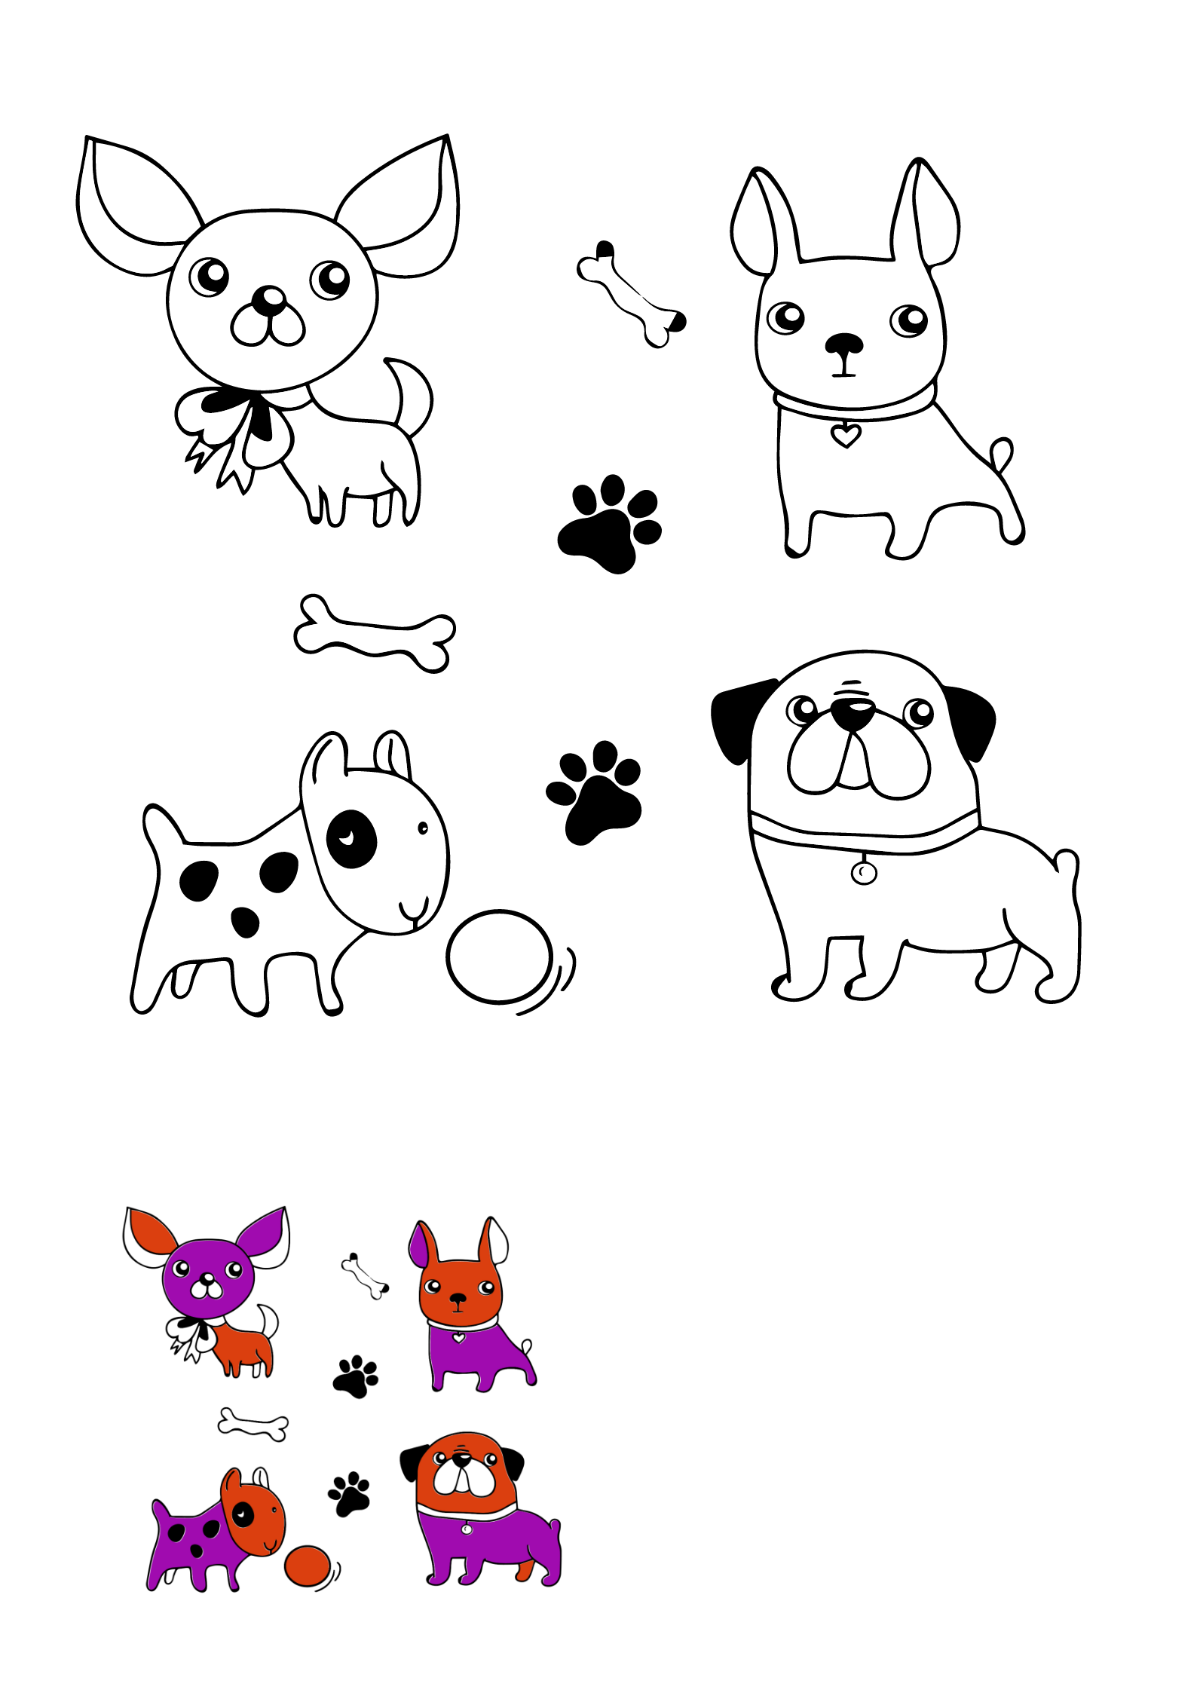 Dog Doodle Coloring Page Template